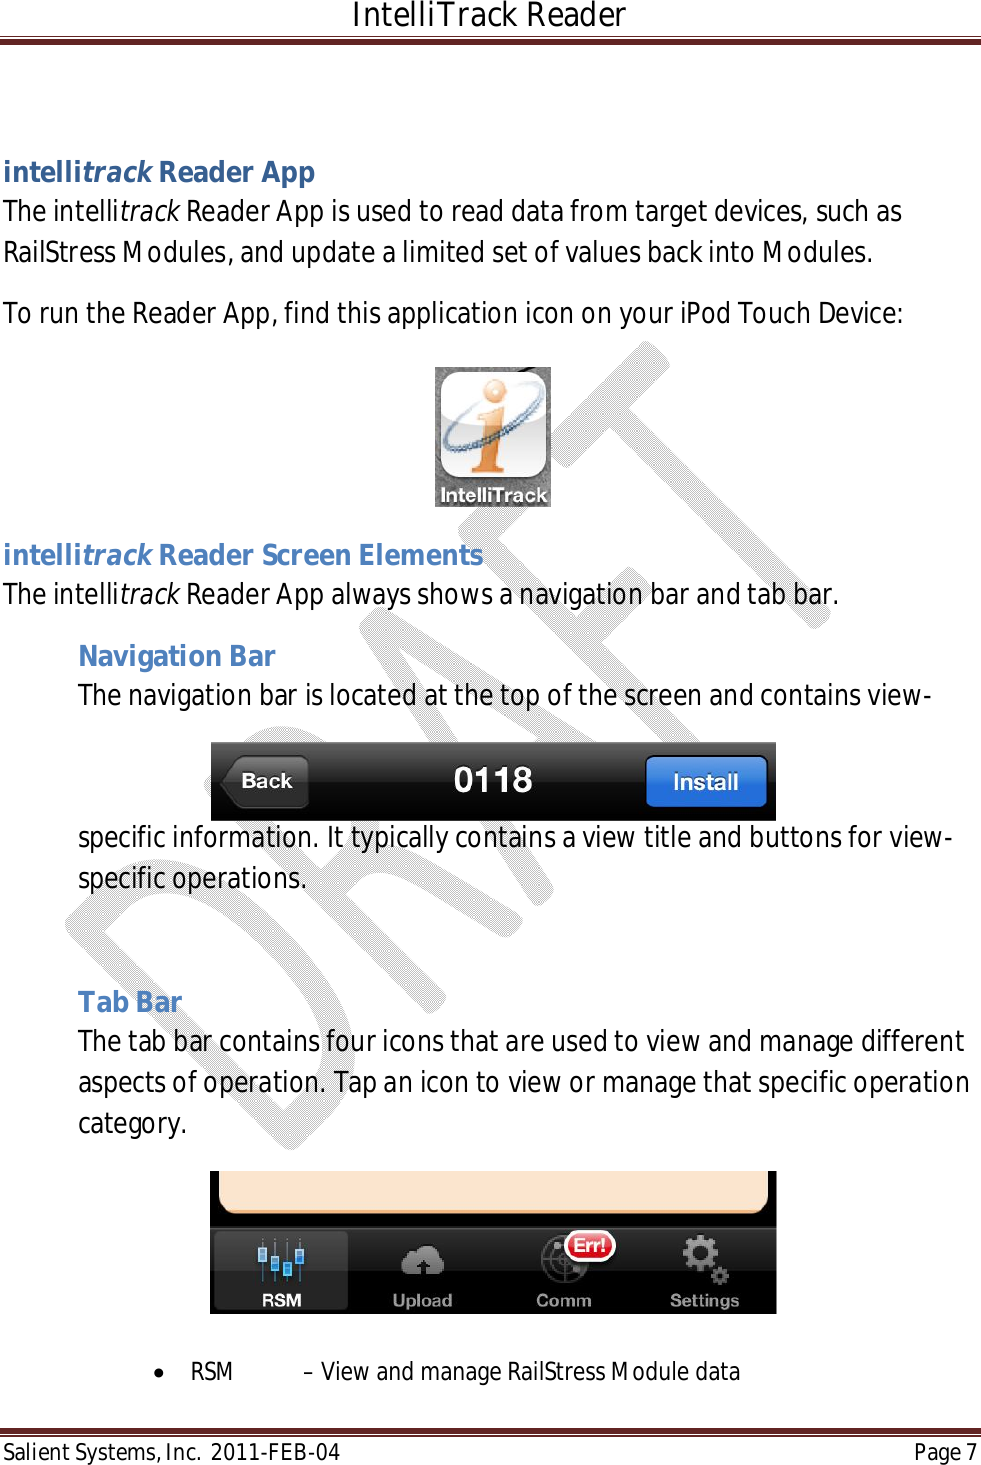 IntelliTrack Reader  Salient Systems, Inc.  2011-FEB-04 Page 7   intellitrack Reader App The intellitrack Reader App is used to read data from target devices, such as RailStress Modules, and update a limited set of values back into Modules. To run the Reader App, find this application icon on your iPod Touch Device:       intellitrack Reader Screen Elements The intellitrack Reader App always shows a navigation bar and tab bar.    Navigation Bar The navigation bar is located at the top of the screen and contains view-specific information. It typically contains a view title and buttons for view-specific operations.  Tab Bar The tab bar contains four icons that are used to view and manage different aspects of operation. Tap an icon to view or manage that specific operation category.   RSM  – View and manage RailStress Module data 